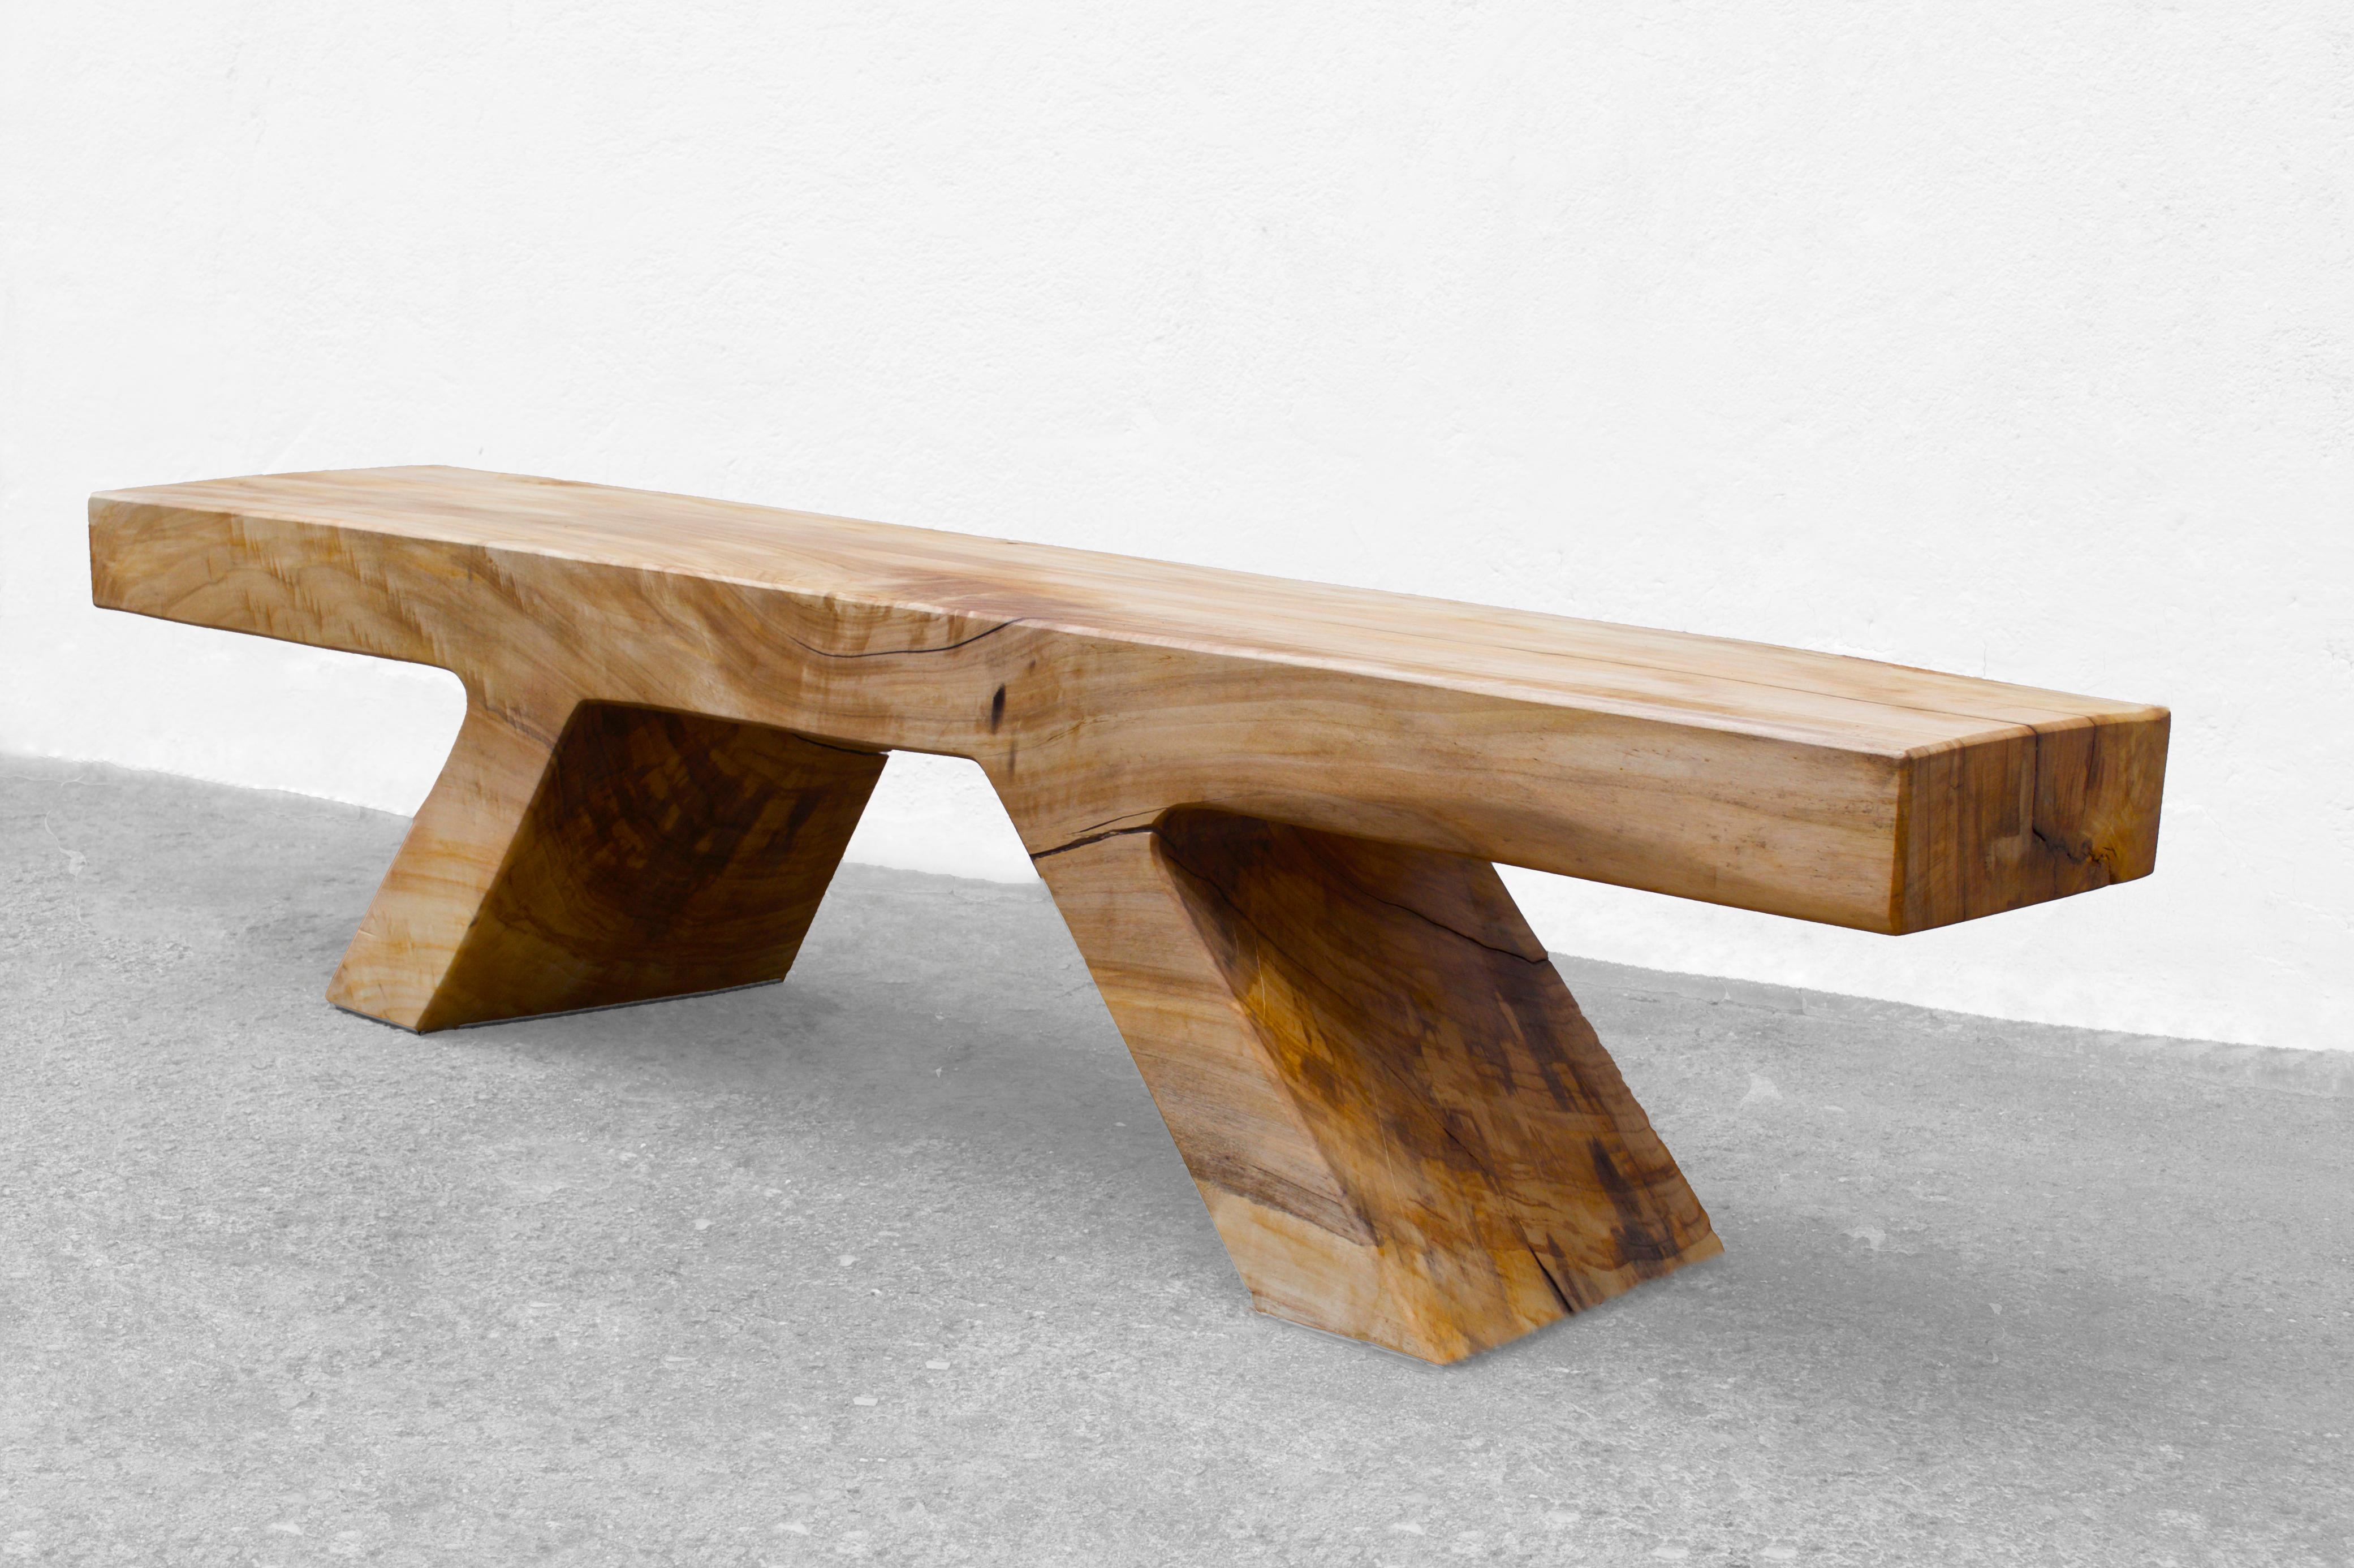 Unique bench sculpted by Jörg Pietschmann
Materials: Polished Poplar, oil finish
Dimensions: H 43 x W 183 x D 39 cm

In Pietschmann’s sculptures, trees that for centuries were part of a landscape and founded in primordial forces tell stories